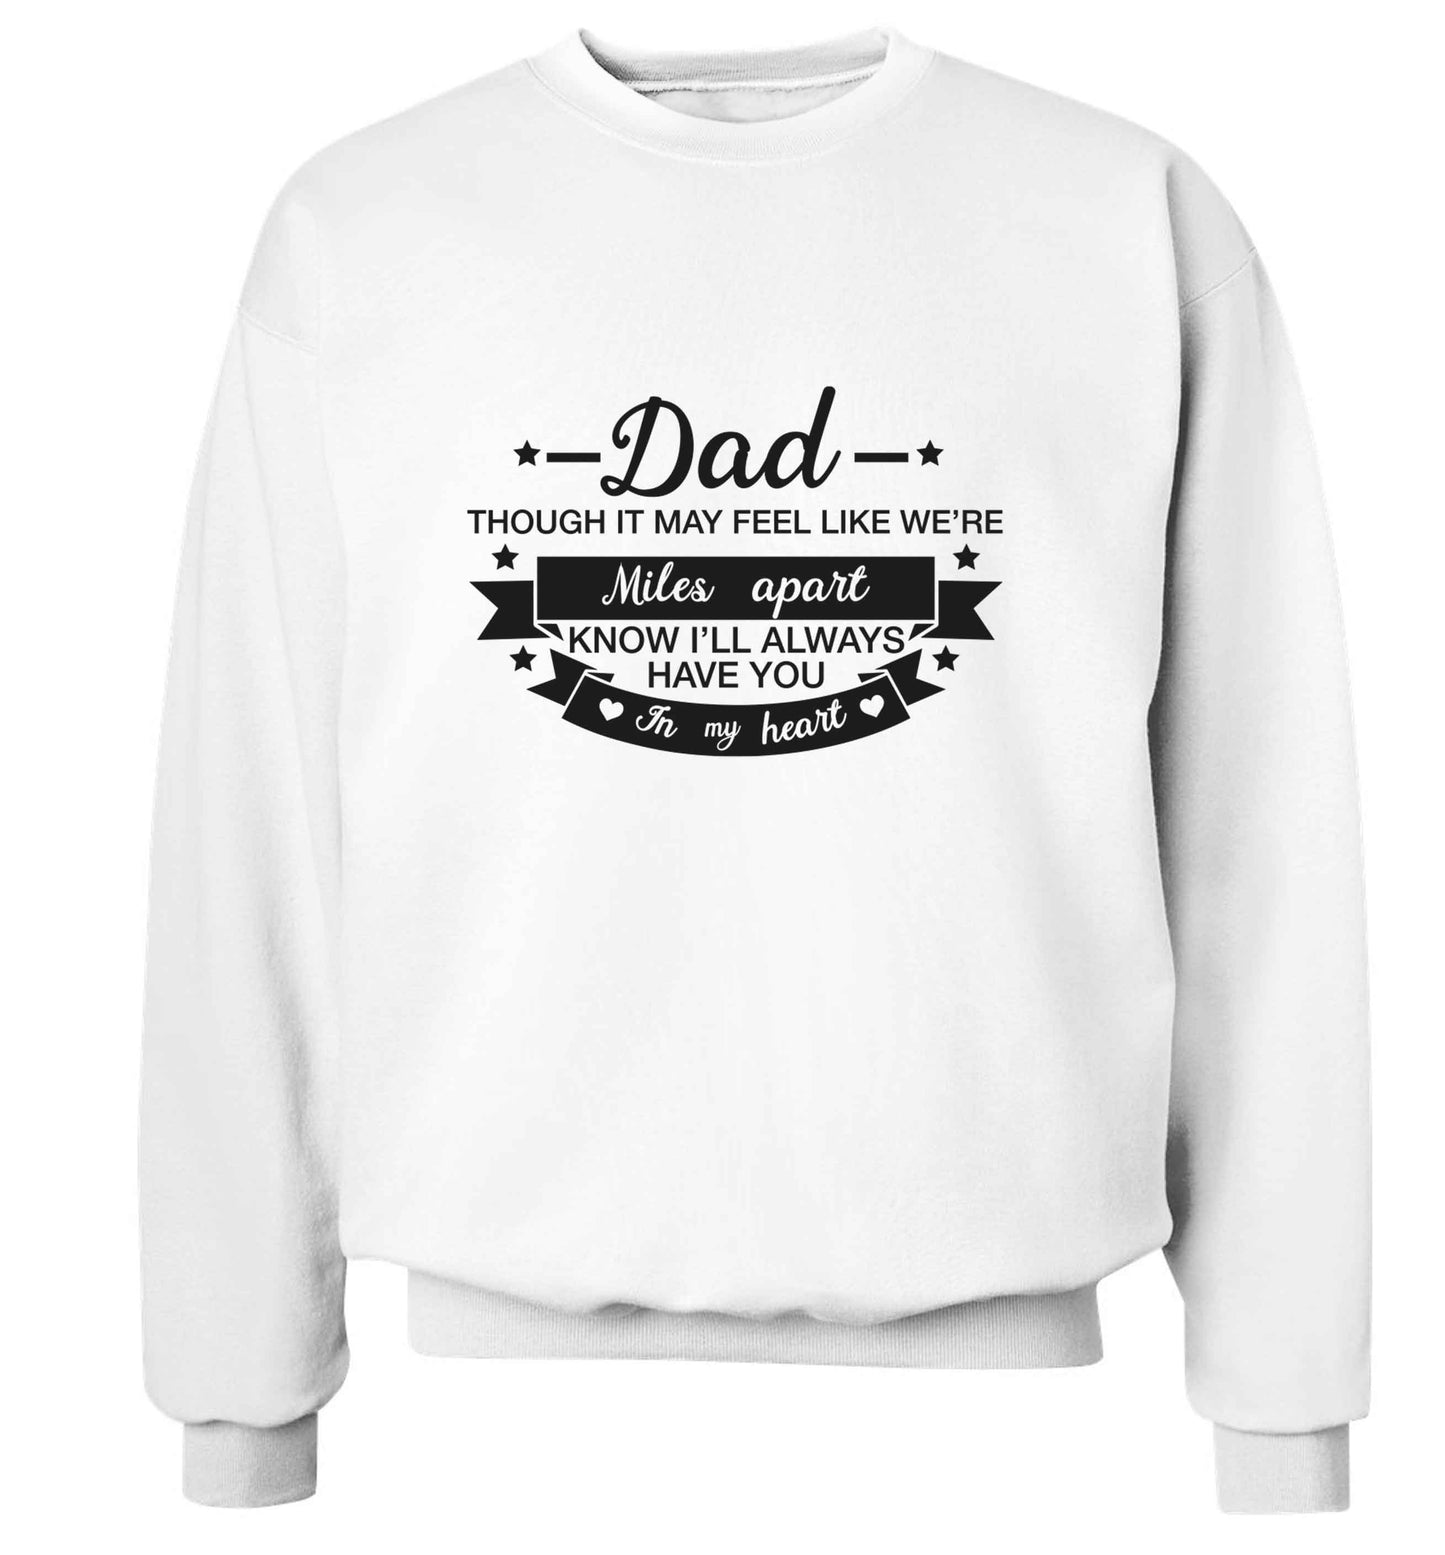 Dad though it may feel like we're miles apart know I'll always have you in my heart adult's unisex white sweater 2XL